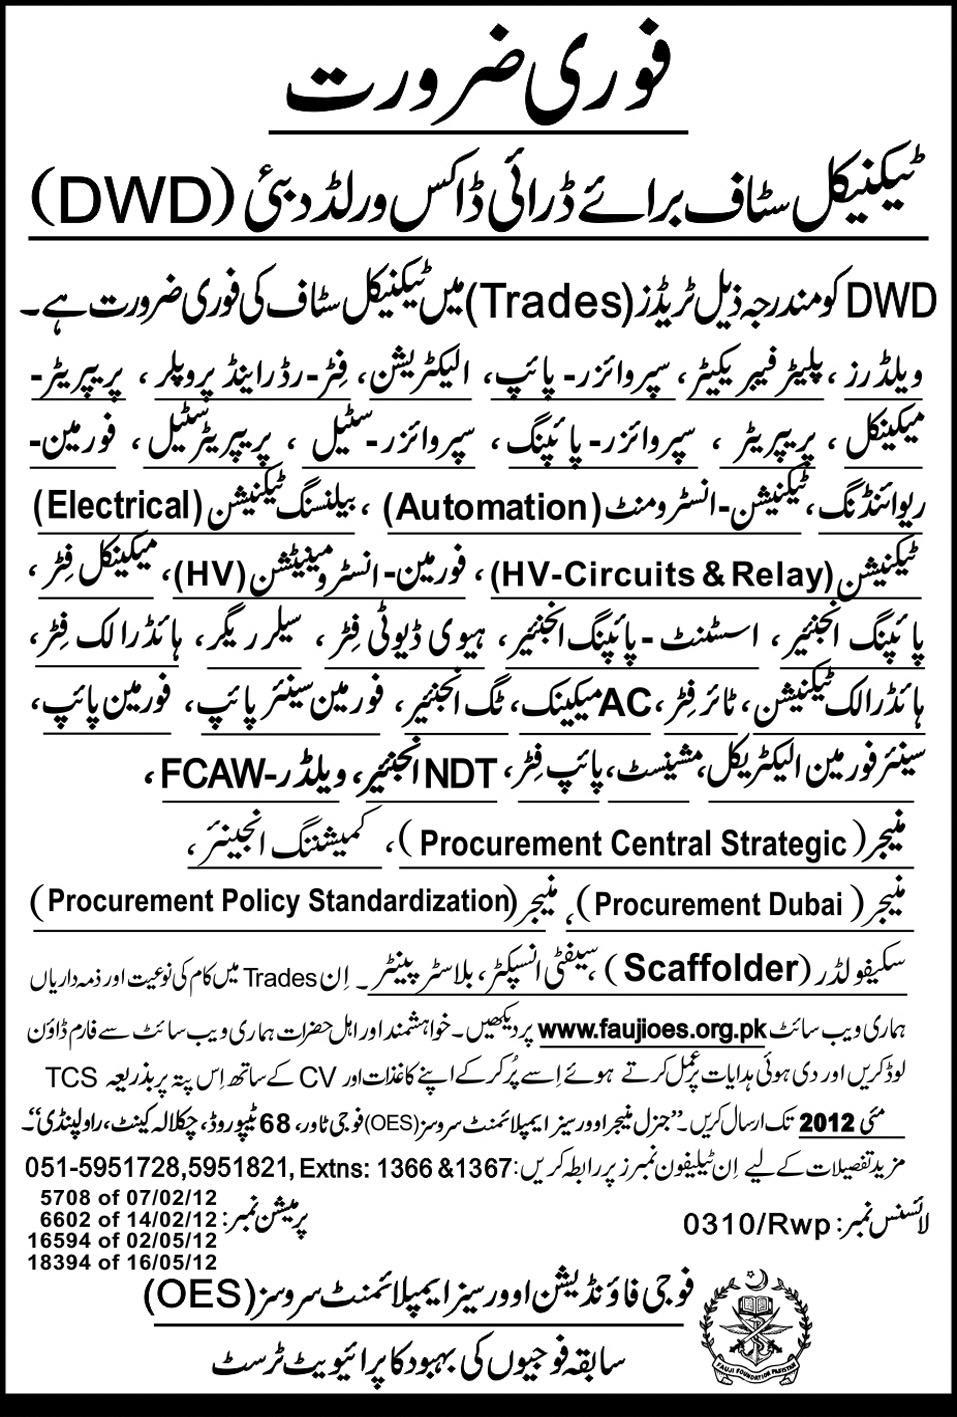 Technical Staff Required for DWD